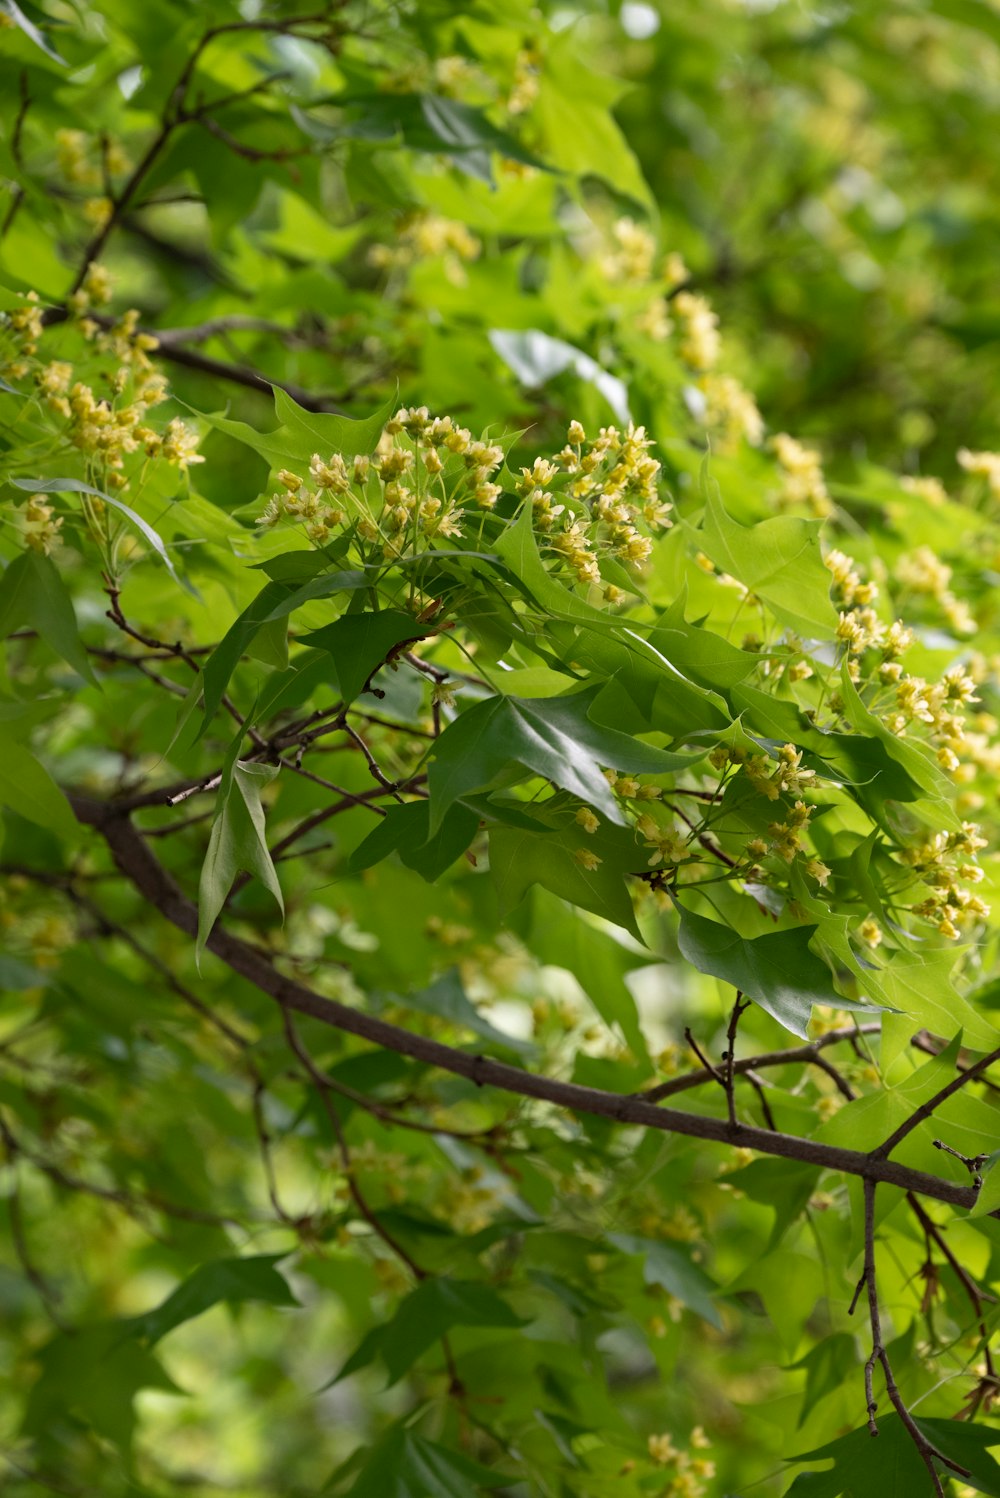 a close up of a tree with lots of green leaves